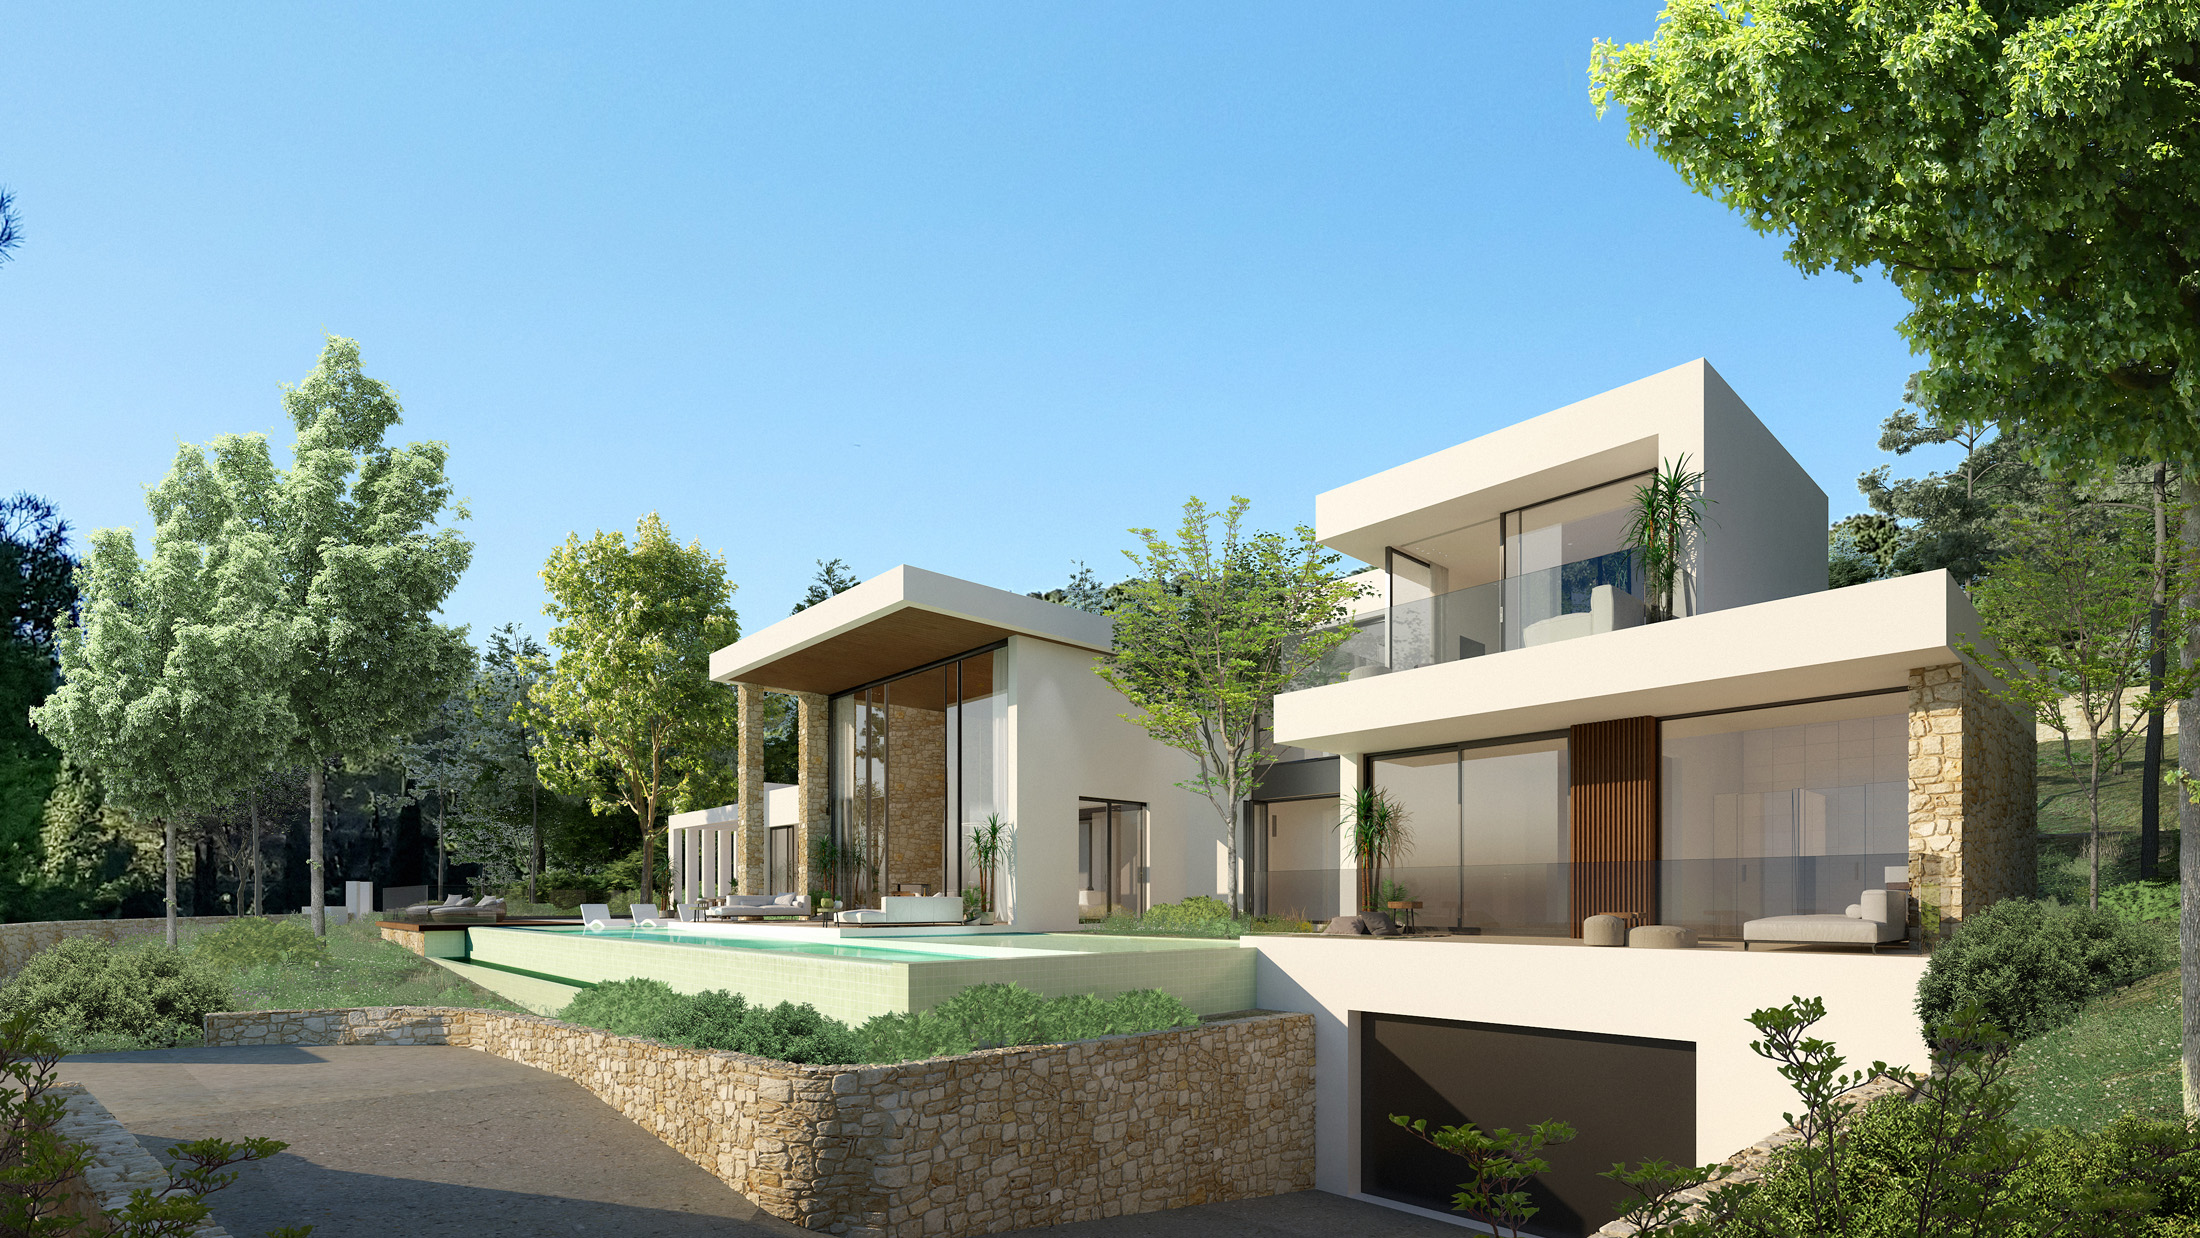 Render showing the pool of a luxury Ibizan villa